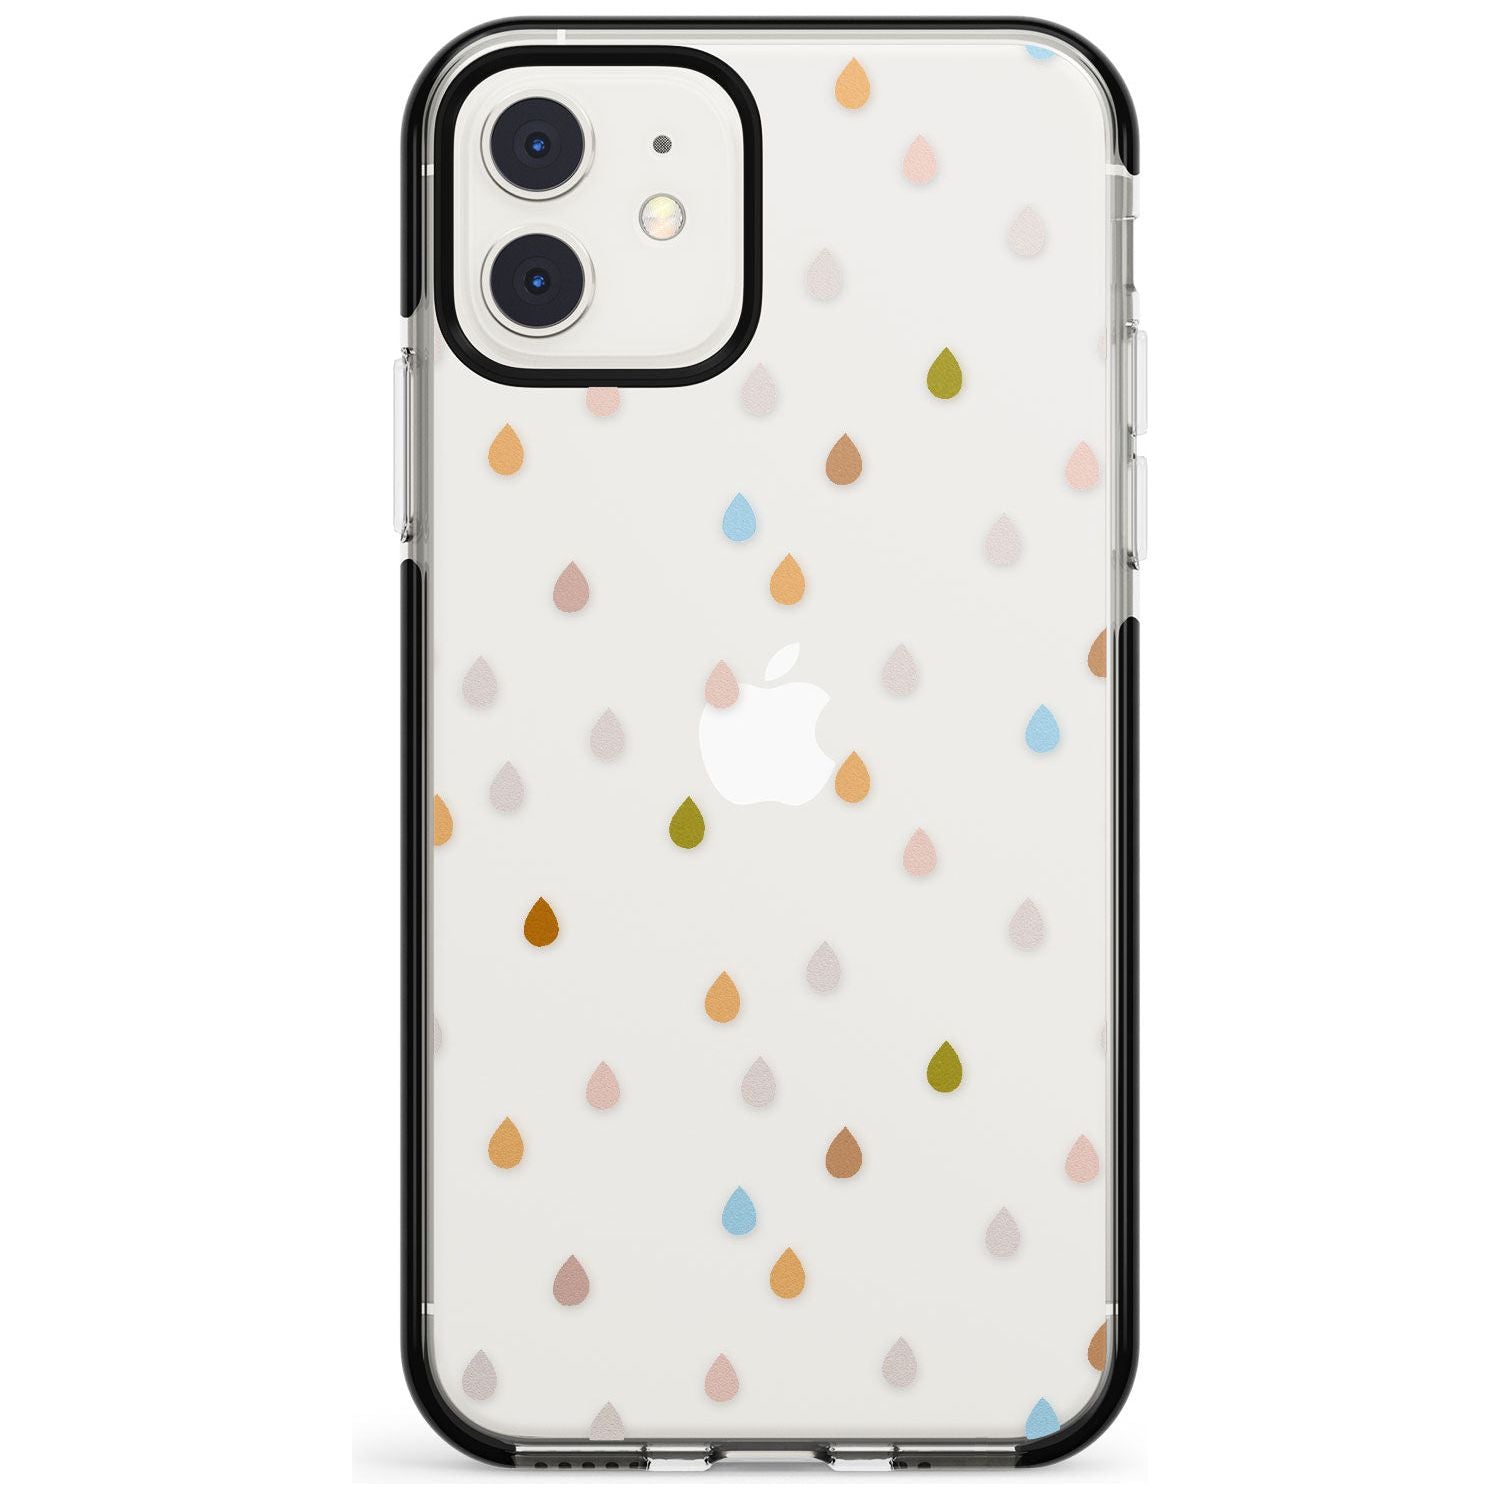 Raindrops Pink Fade Impact Phone Case for iPhone 11 Pro Max